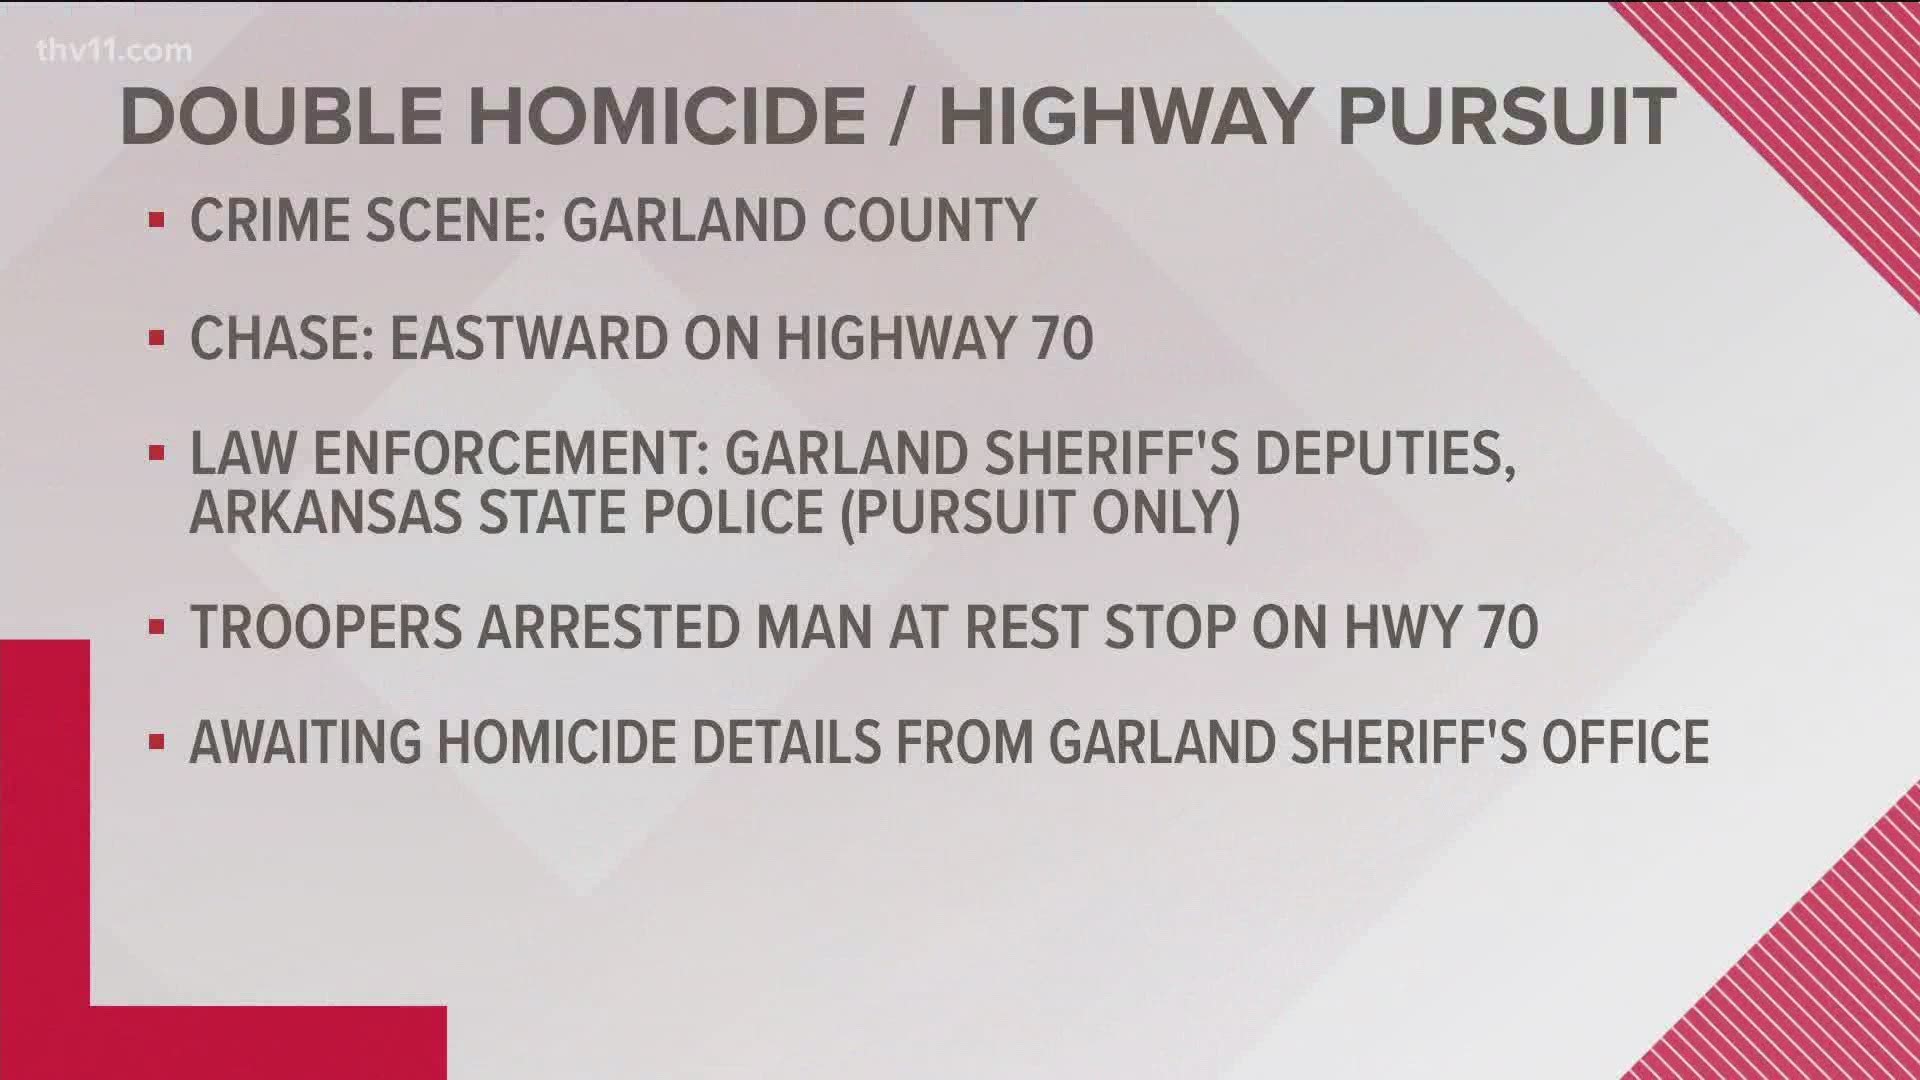 A suspect is in custody after a Garland County double homicide.